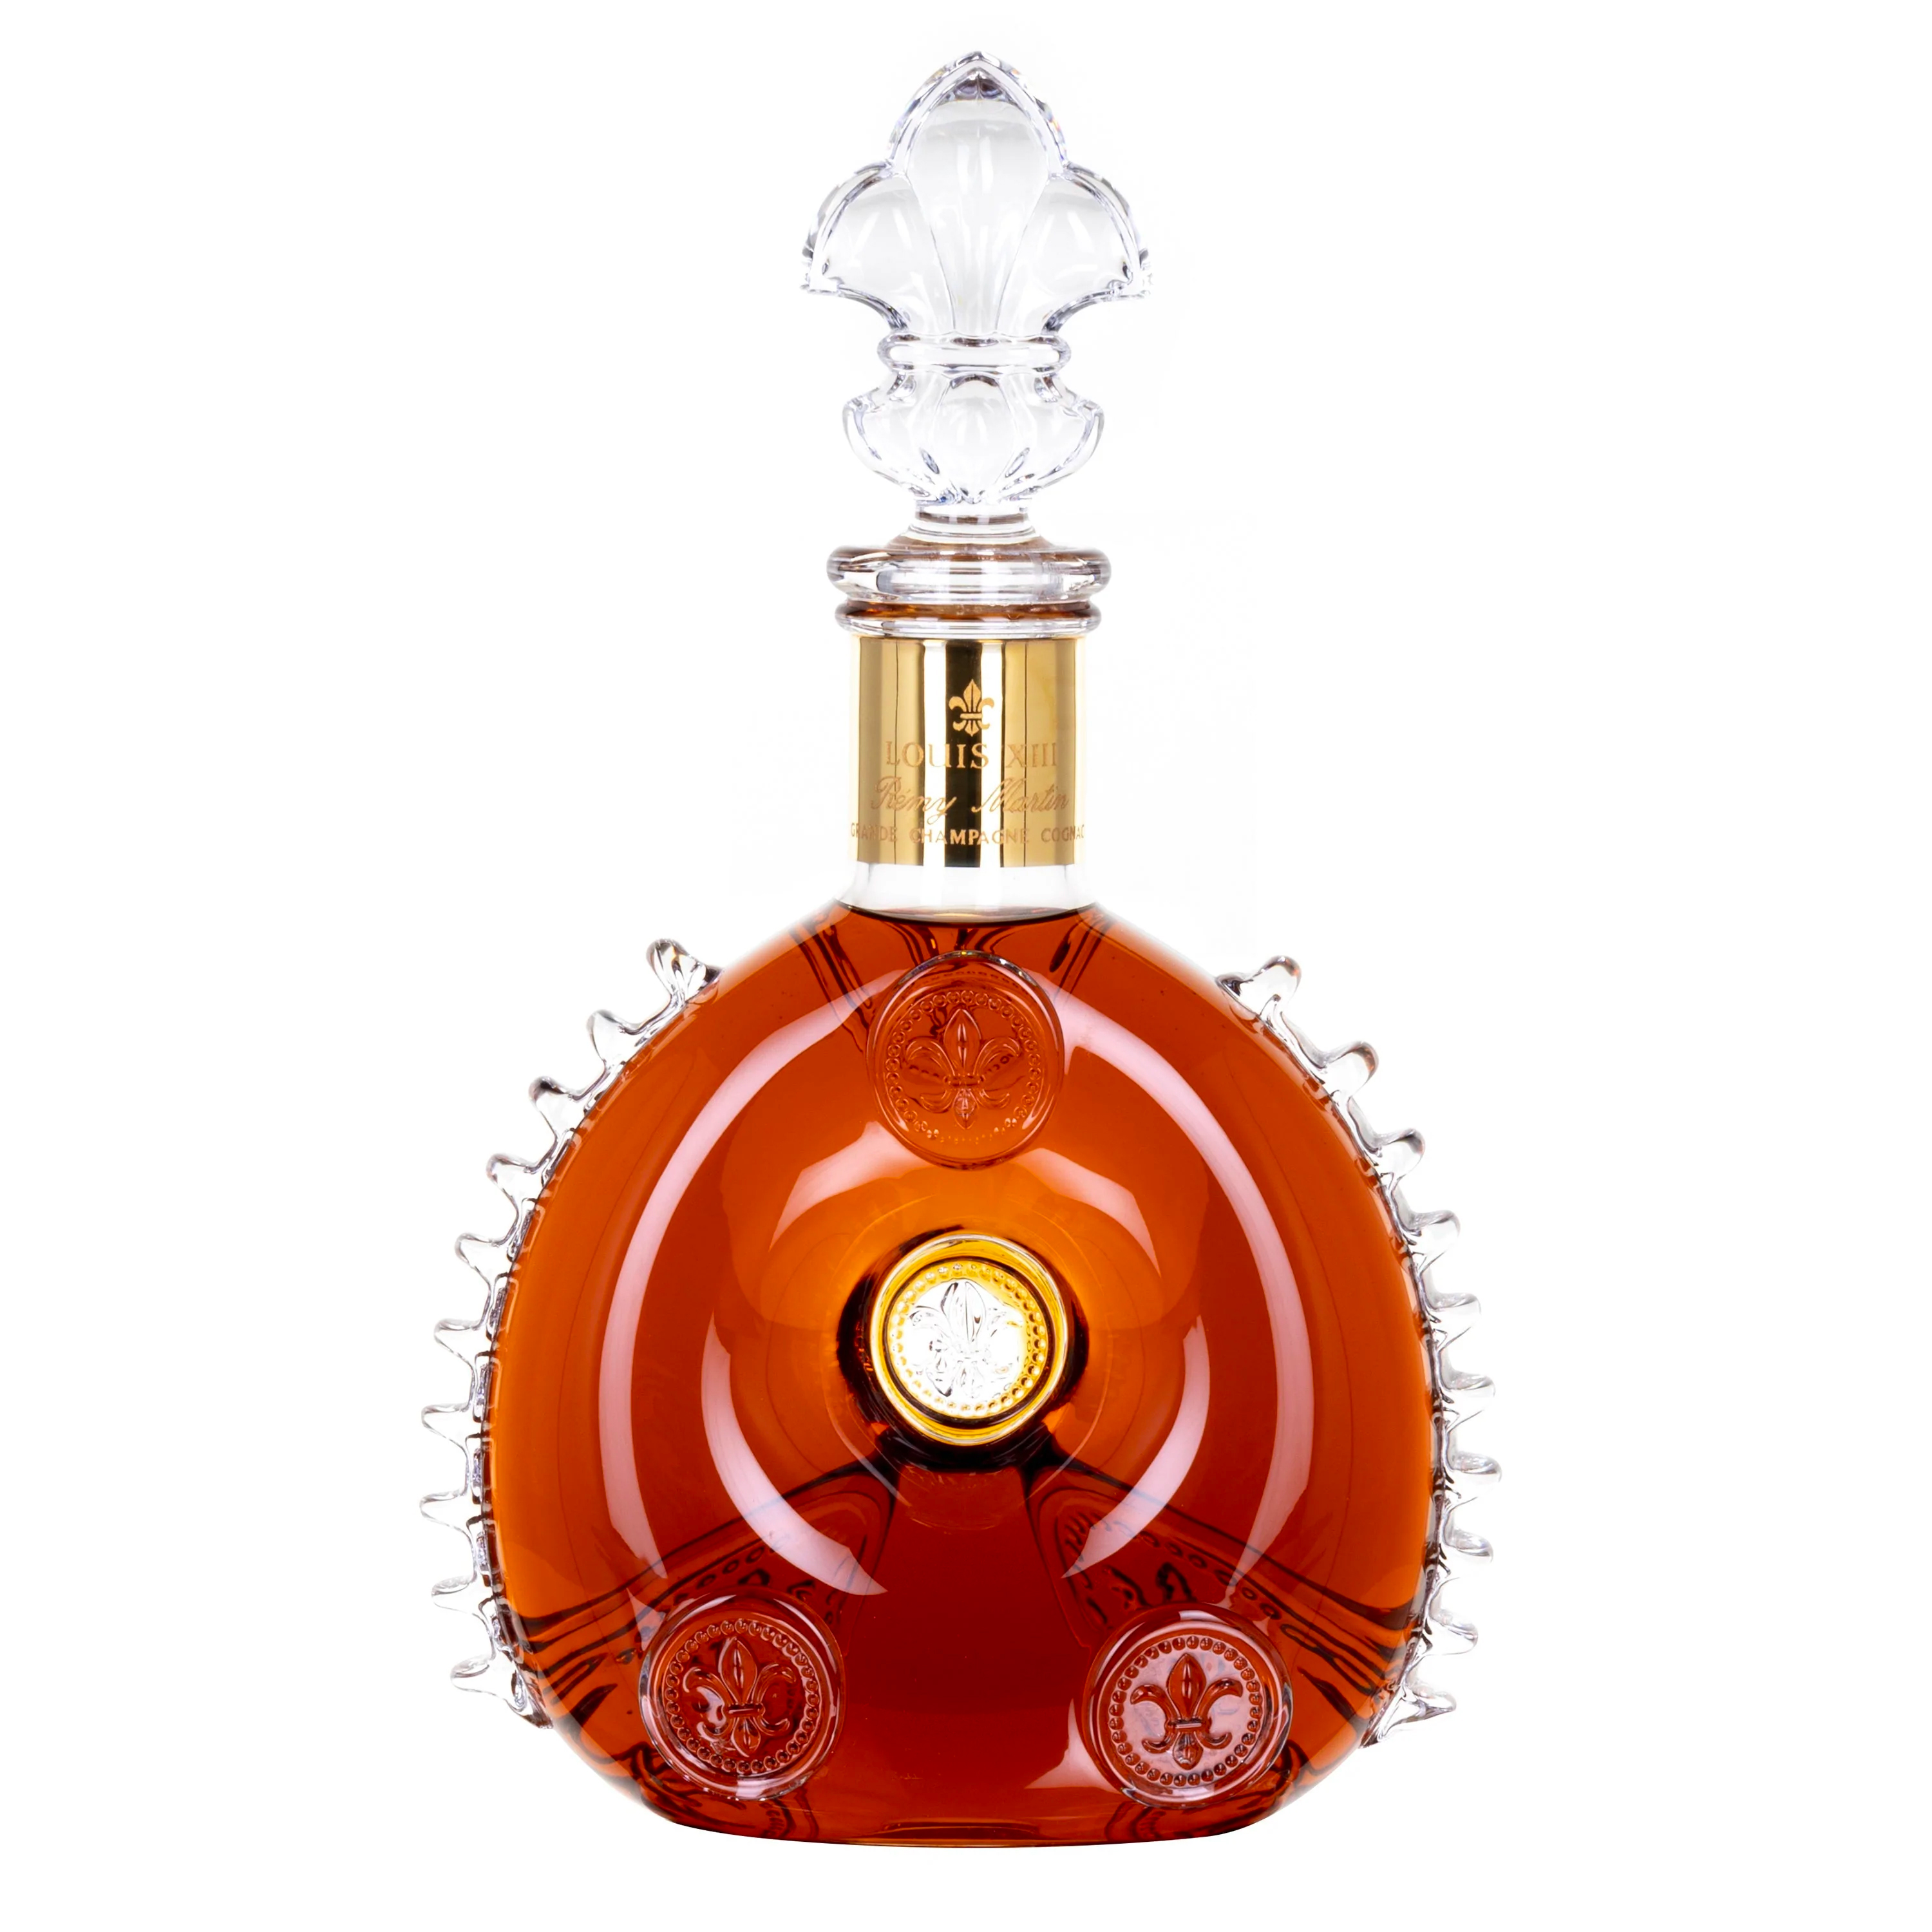 <h2><span style="color: rgb(0, 0, 0);">LOUIS XIII Classic decanter</span></h2>